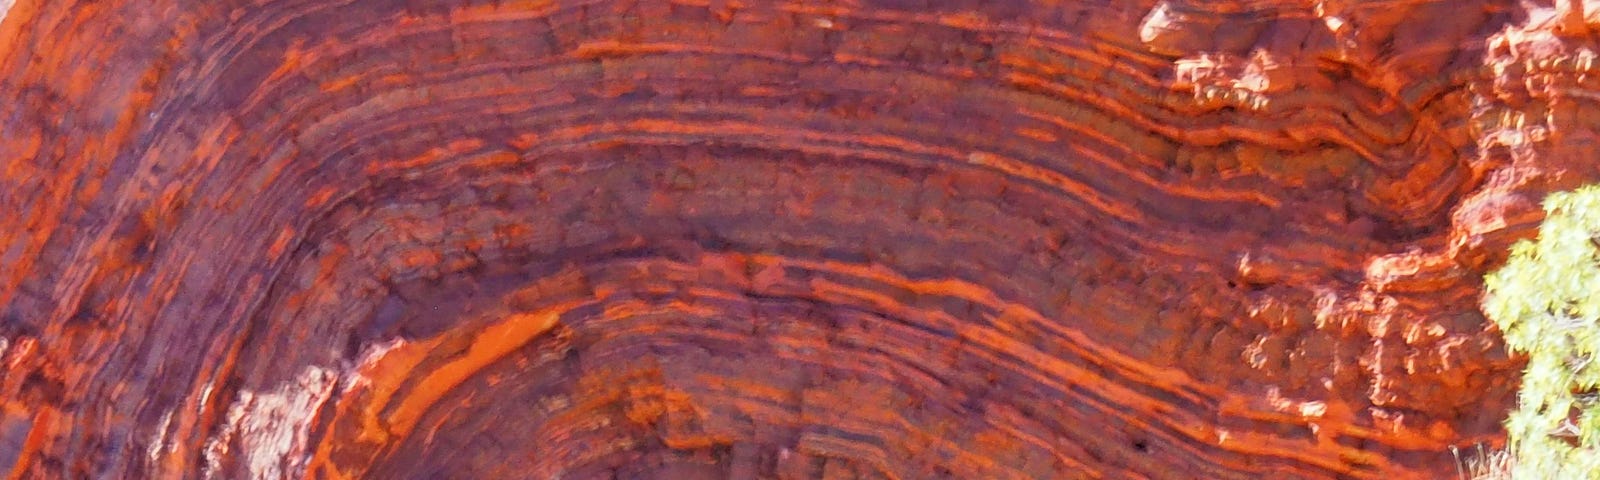 Rust red sedimentary layers, folded like a swirl of whipped cream